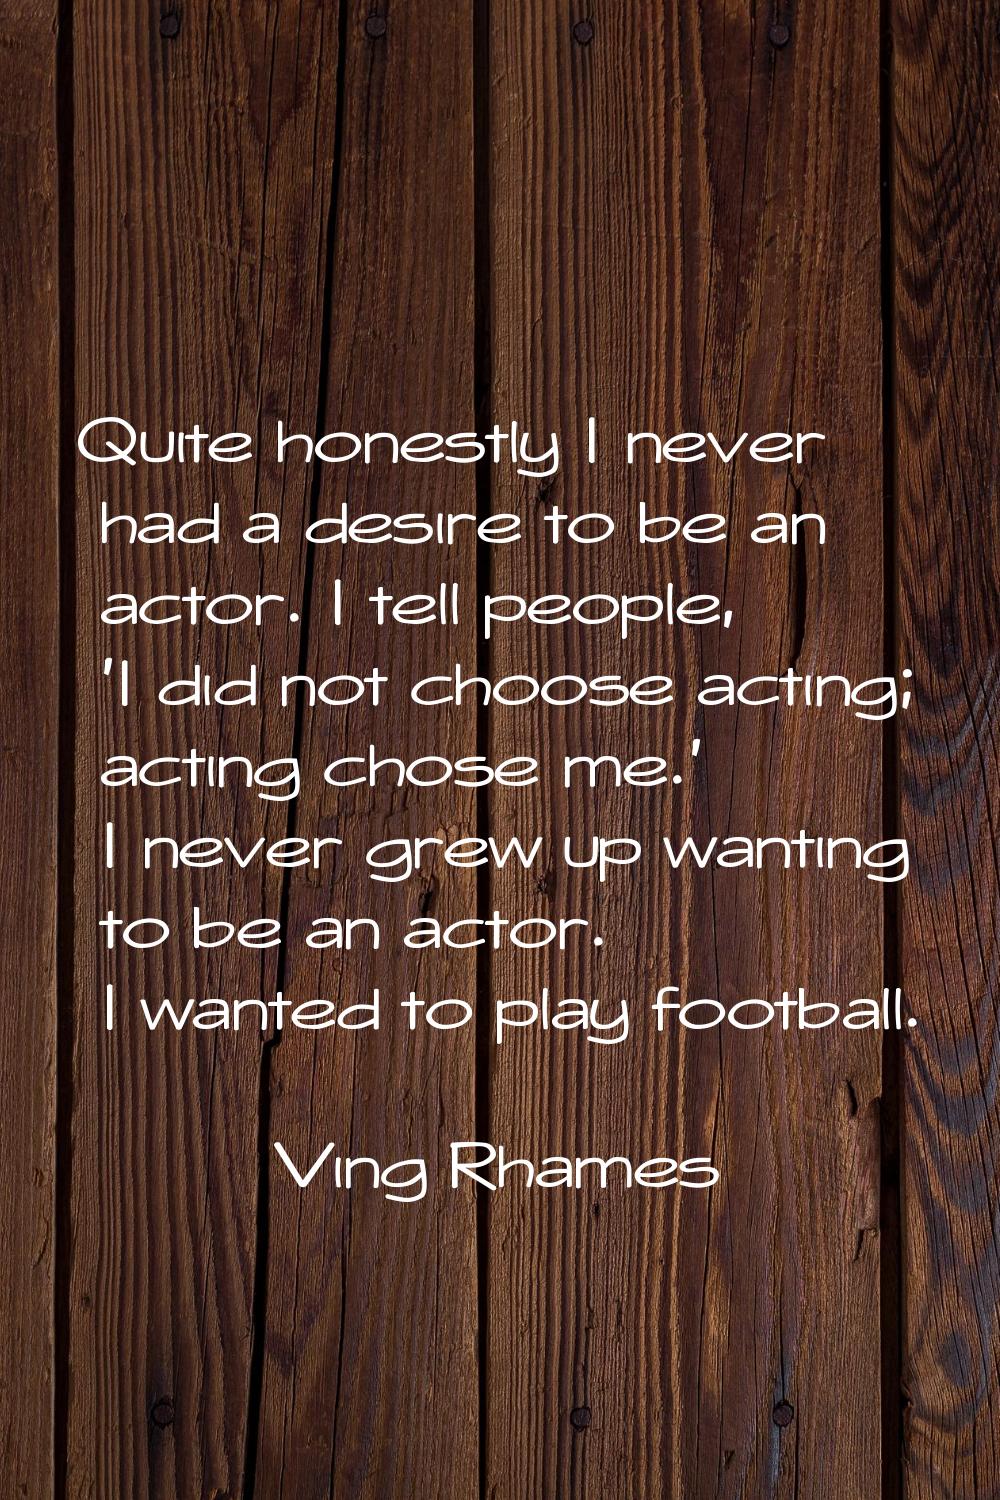 Quite honestly I never had a desire to be an actor. I tell people, 'I did not choose acting; acting